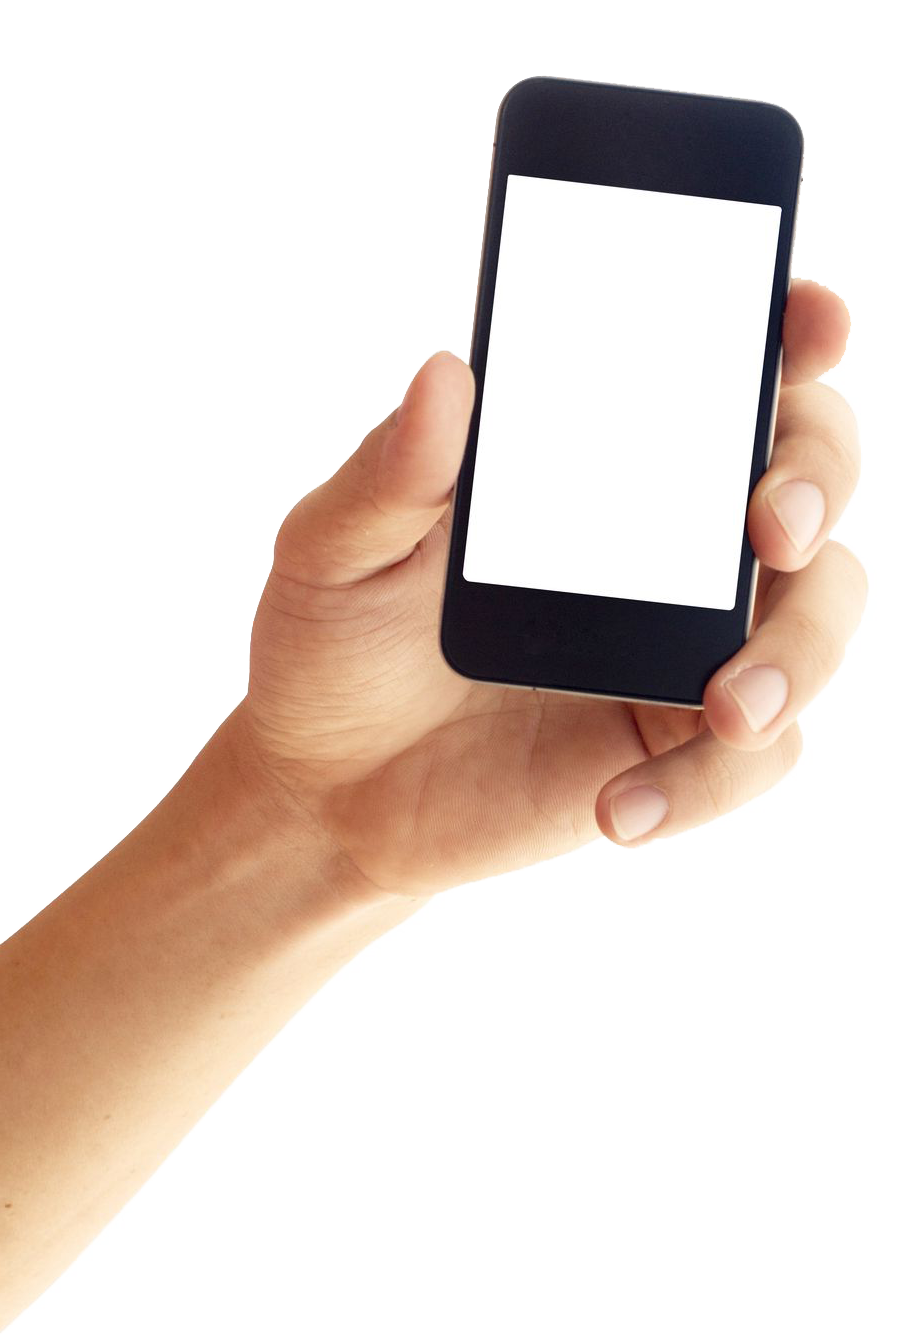 iPhone Smartphone in Hands PNG Image